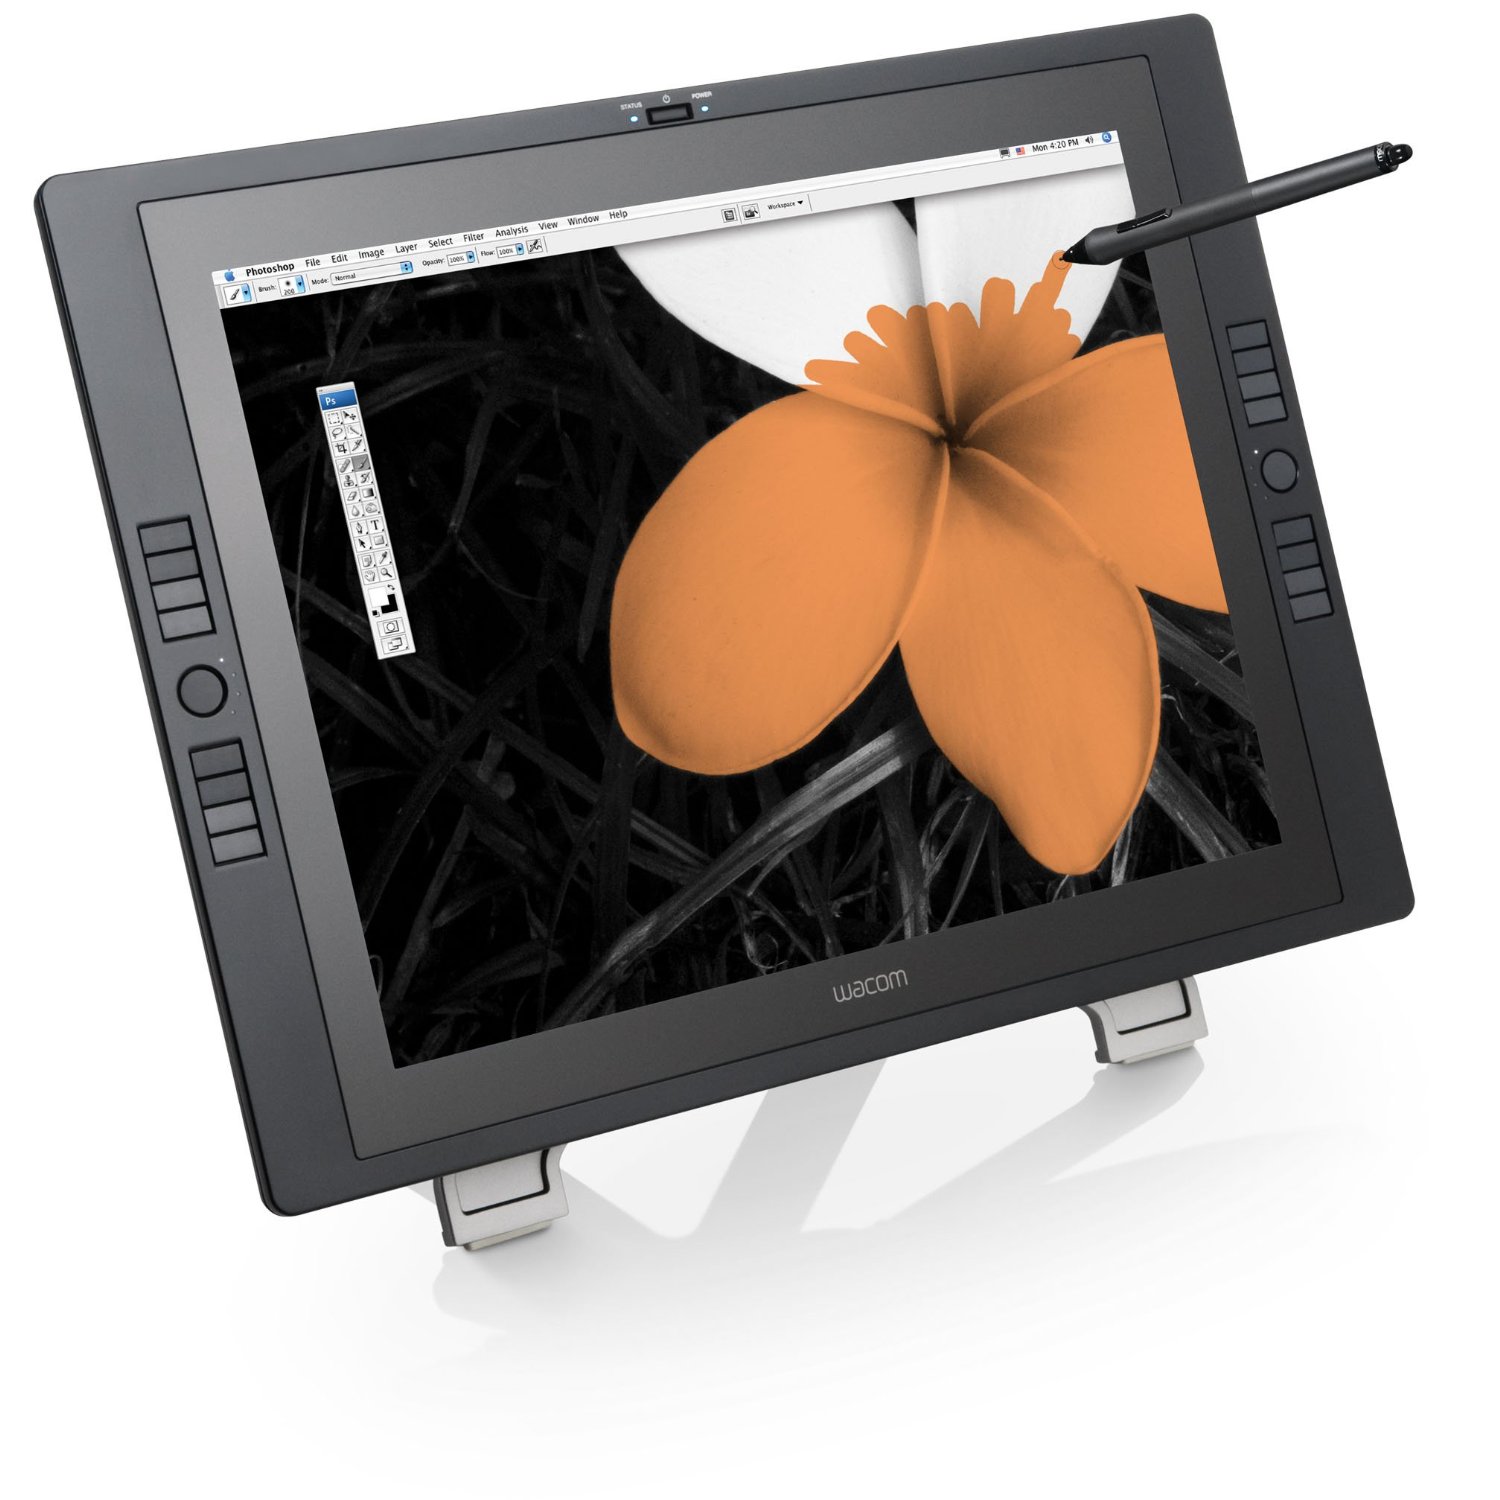 http://thetechjournal.com/wp-content/uploads/images/1111/1320425118-wacom-dtk2100-21inch-pen-display--graphics-monitor-1.jpg